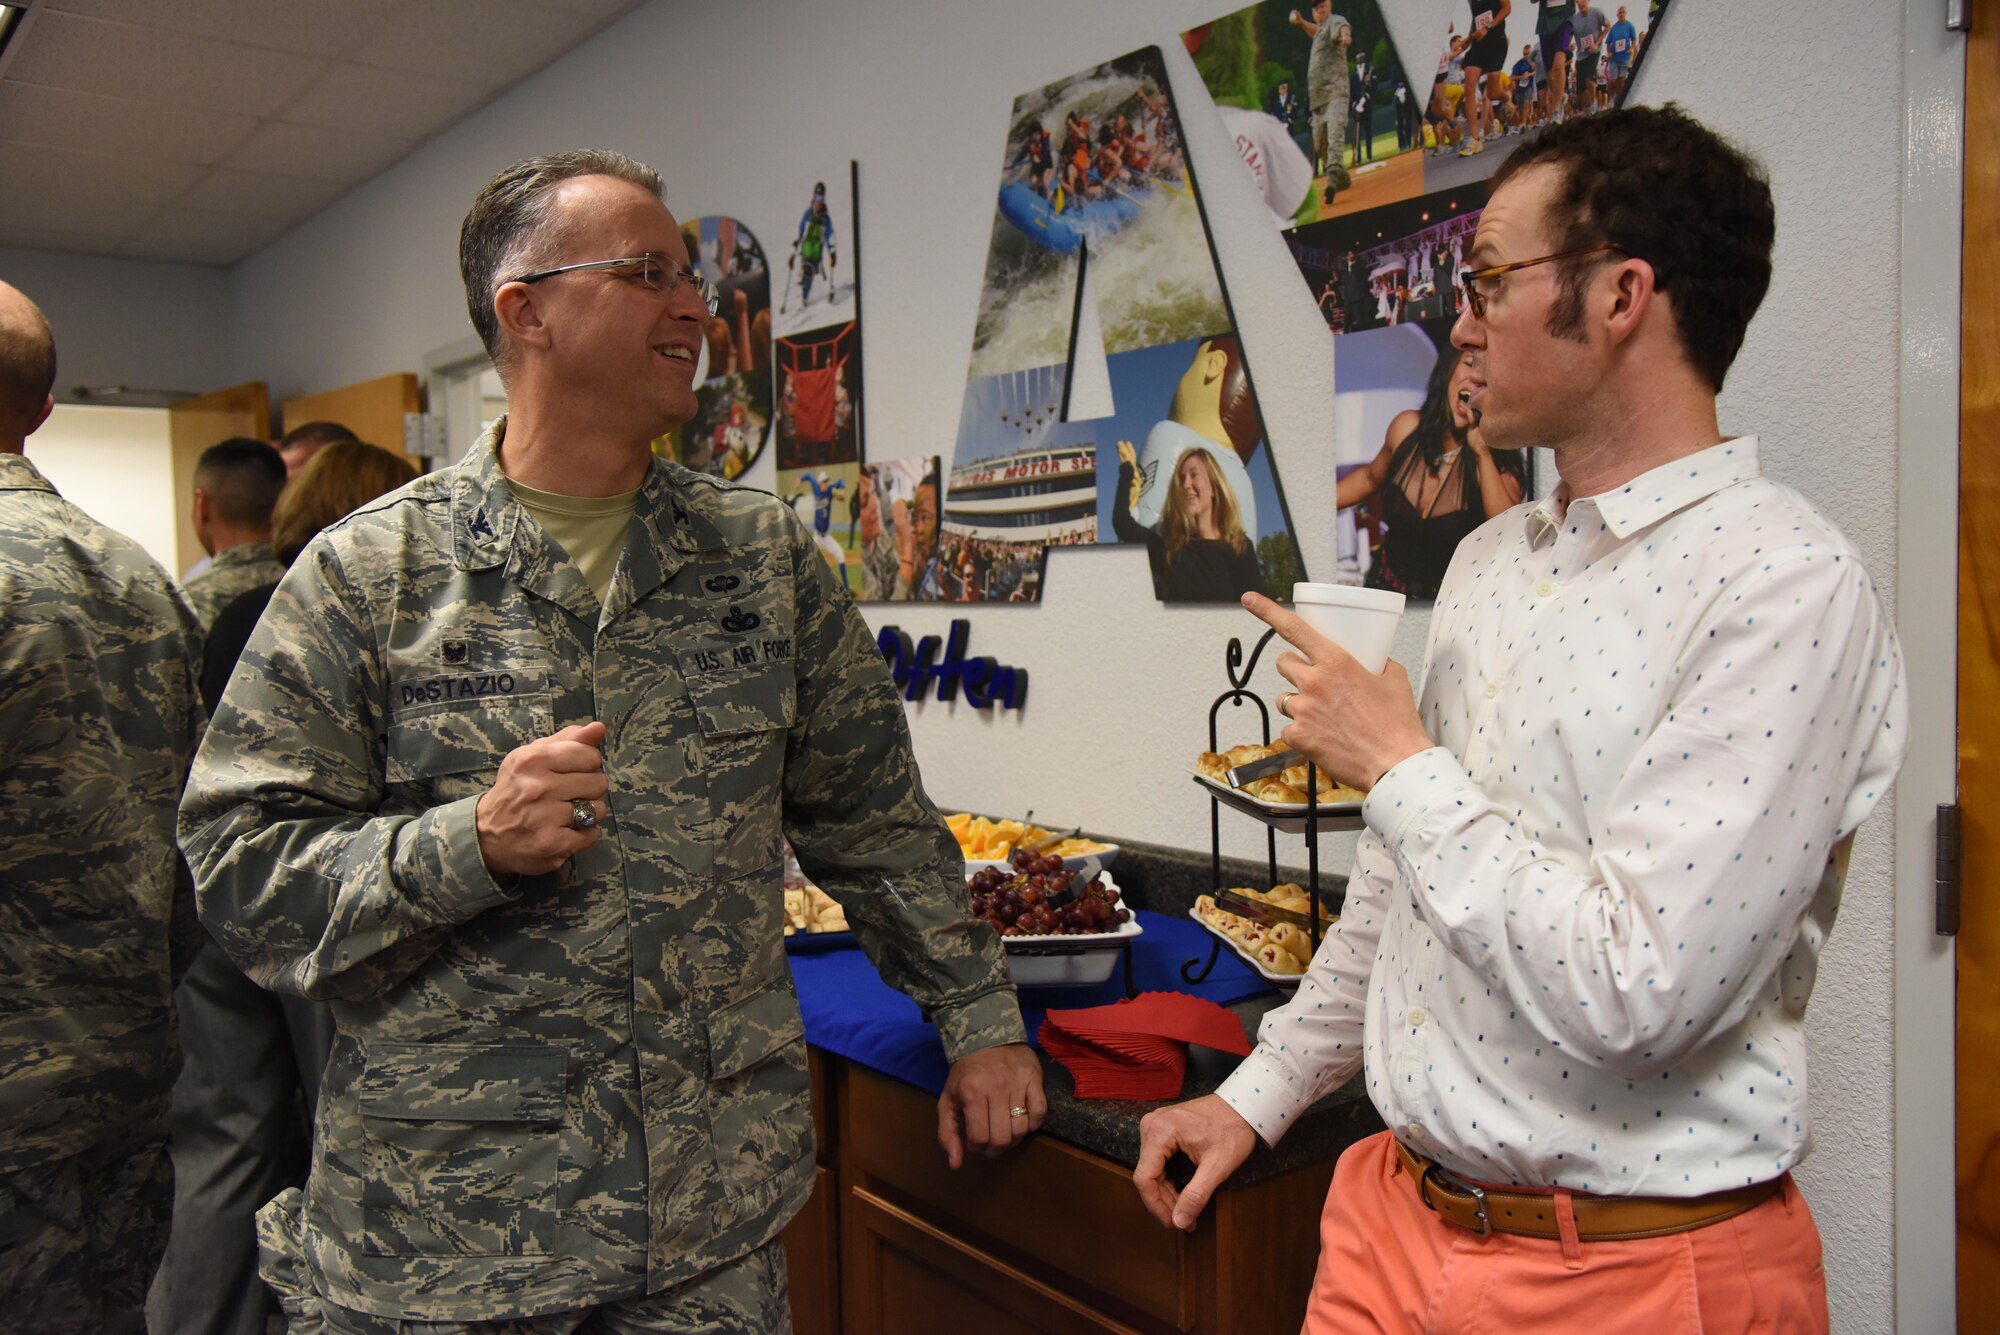 Col. John DeStazio, 2nd Air Force Technical Training Operations Center commander, and Ryan Goldin, Florence Gardens-Community Development vice president, engage in conversation during an honorary commanders 81st Mission Support Group orientation tour in the Sablich Center Aug. 10, 2017, on Keesler Air Force Base, Miss. The honorary commander program is a partnership between base leadership and local civic leaders to promote strong ties between military and civilian leaders. (U.S. Air Force photo by Kemberly Groue)